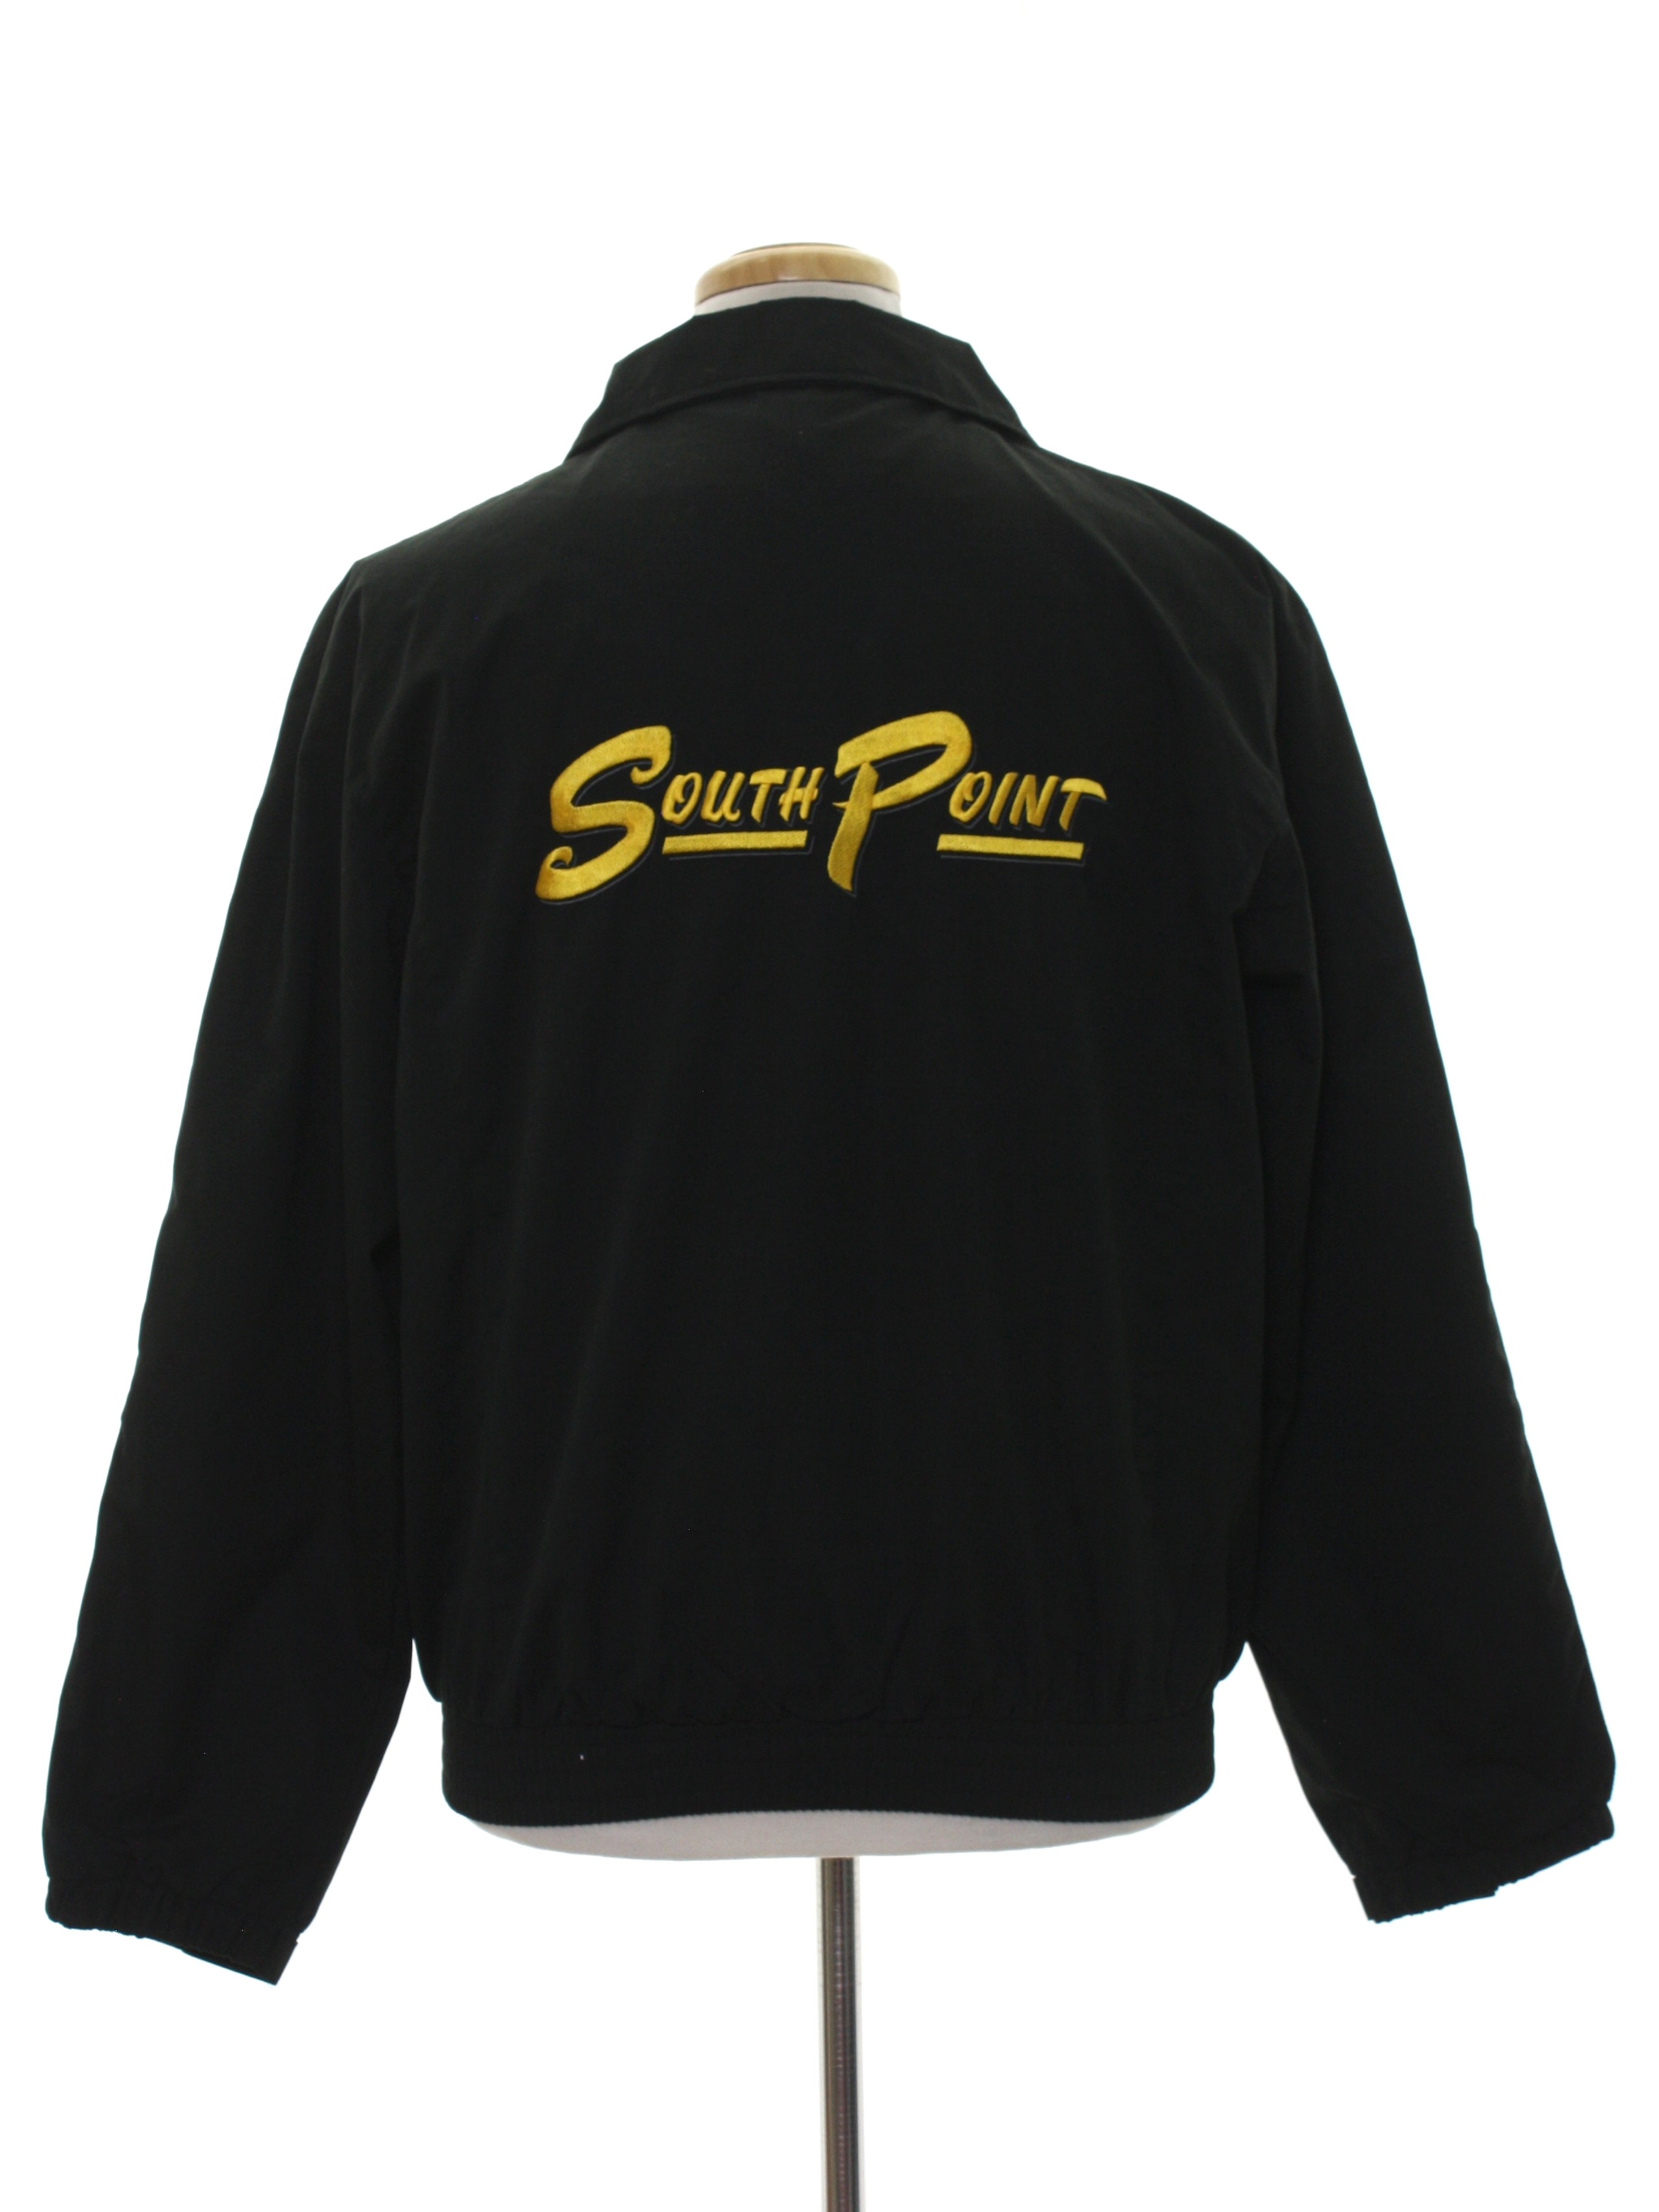 South Point Nineties Vintage Jacket: 90s or newer -South Point- Mens ...